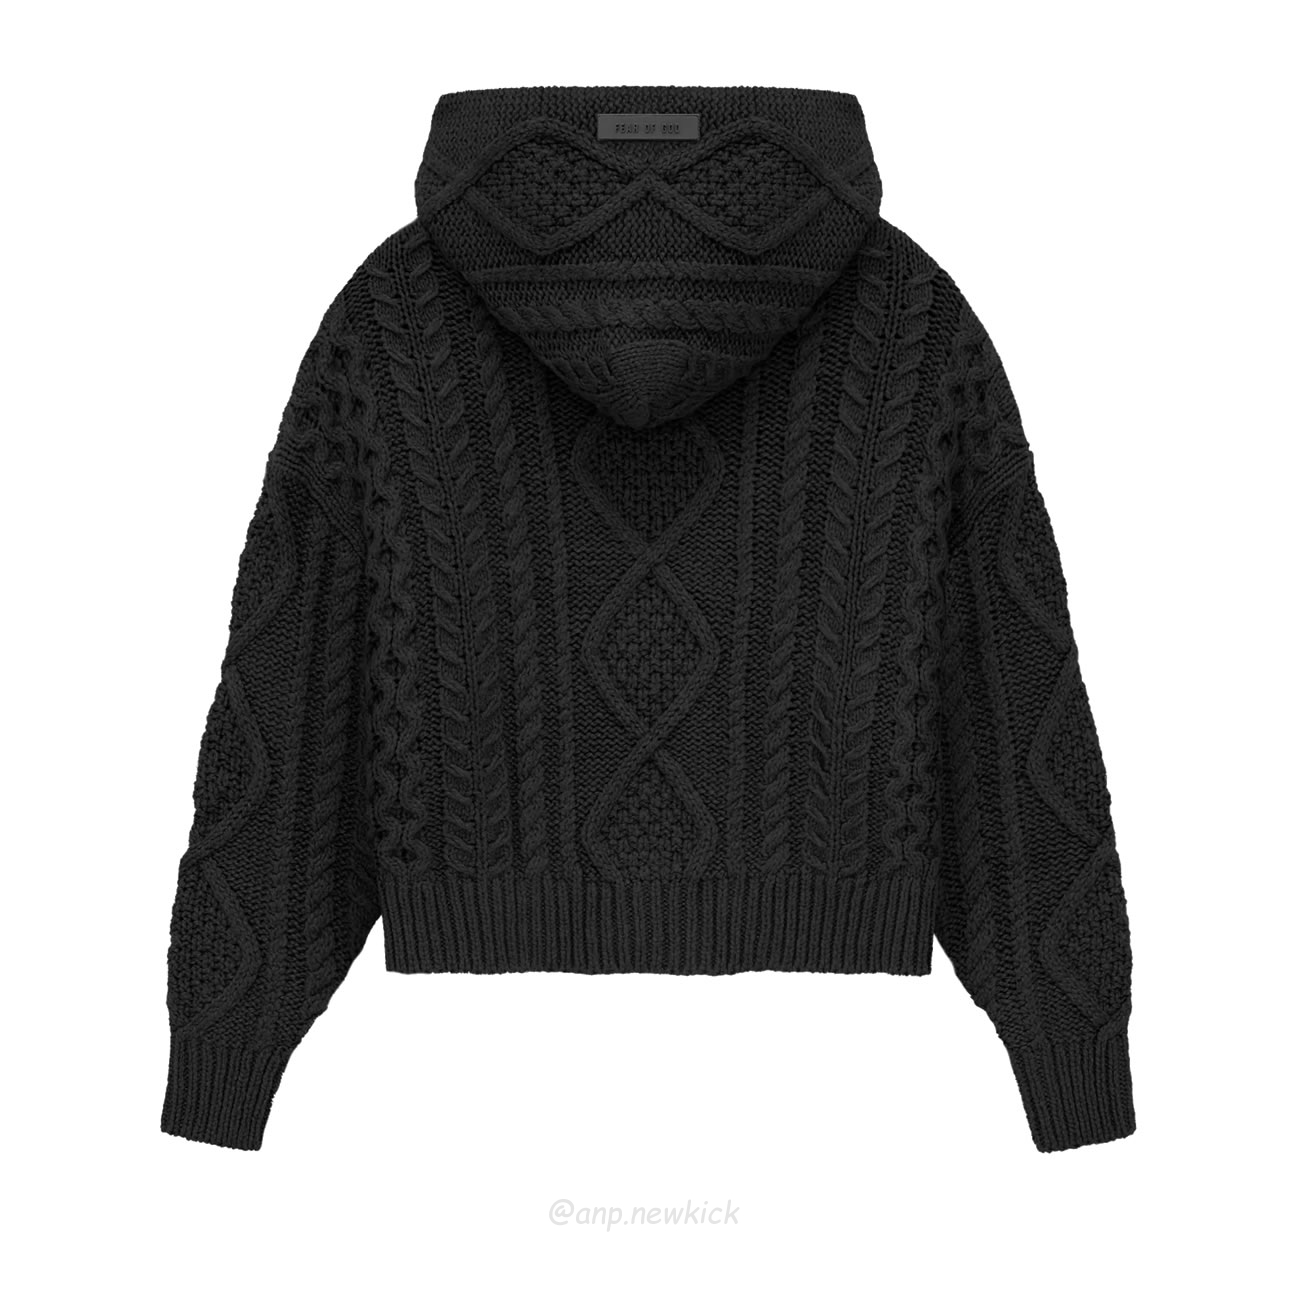 Fear Of God Essentials Fog 23fw New Collection Of Hooded Sweaters In Black Elephant White Beige White S Xl (6) - newkick.org